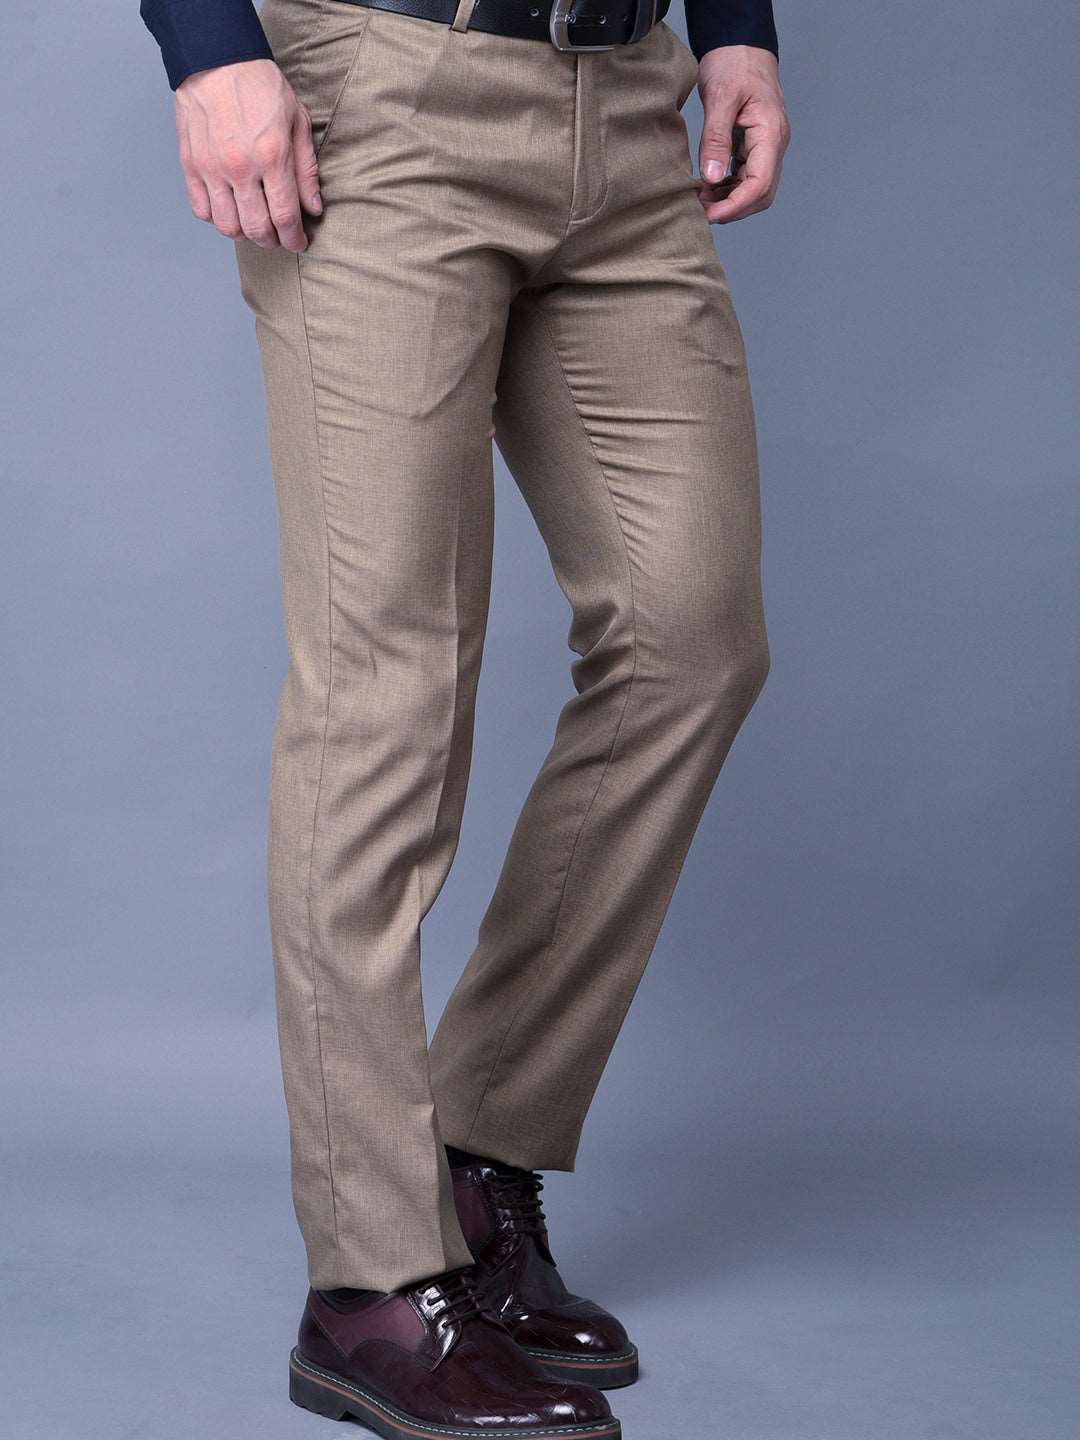 Cobb Grey Ultra Fit Formal Trouser  Premium Quality Fabric  Perfect Fit